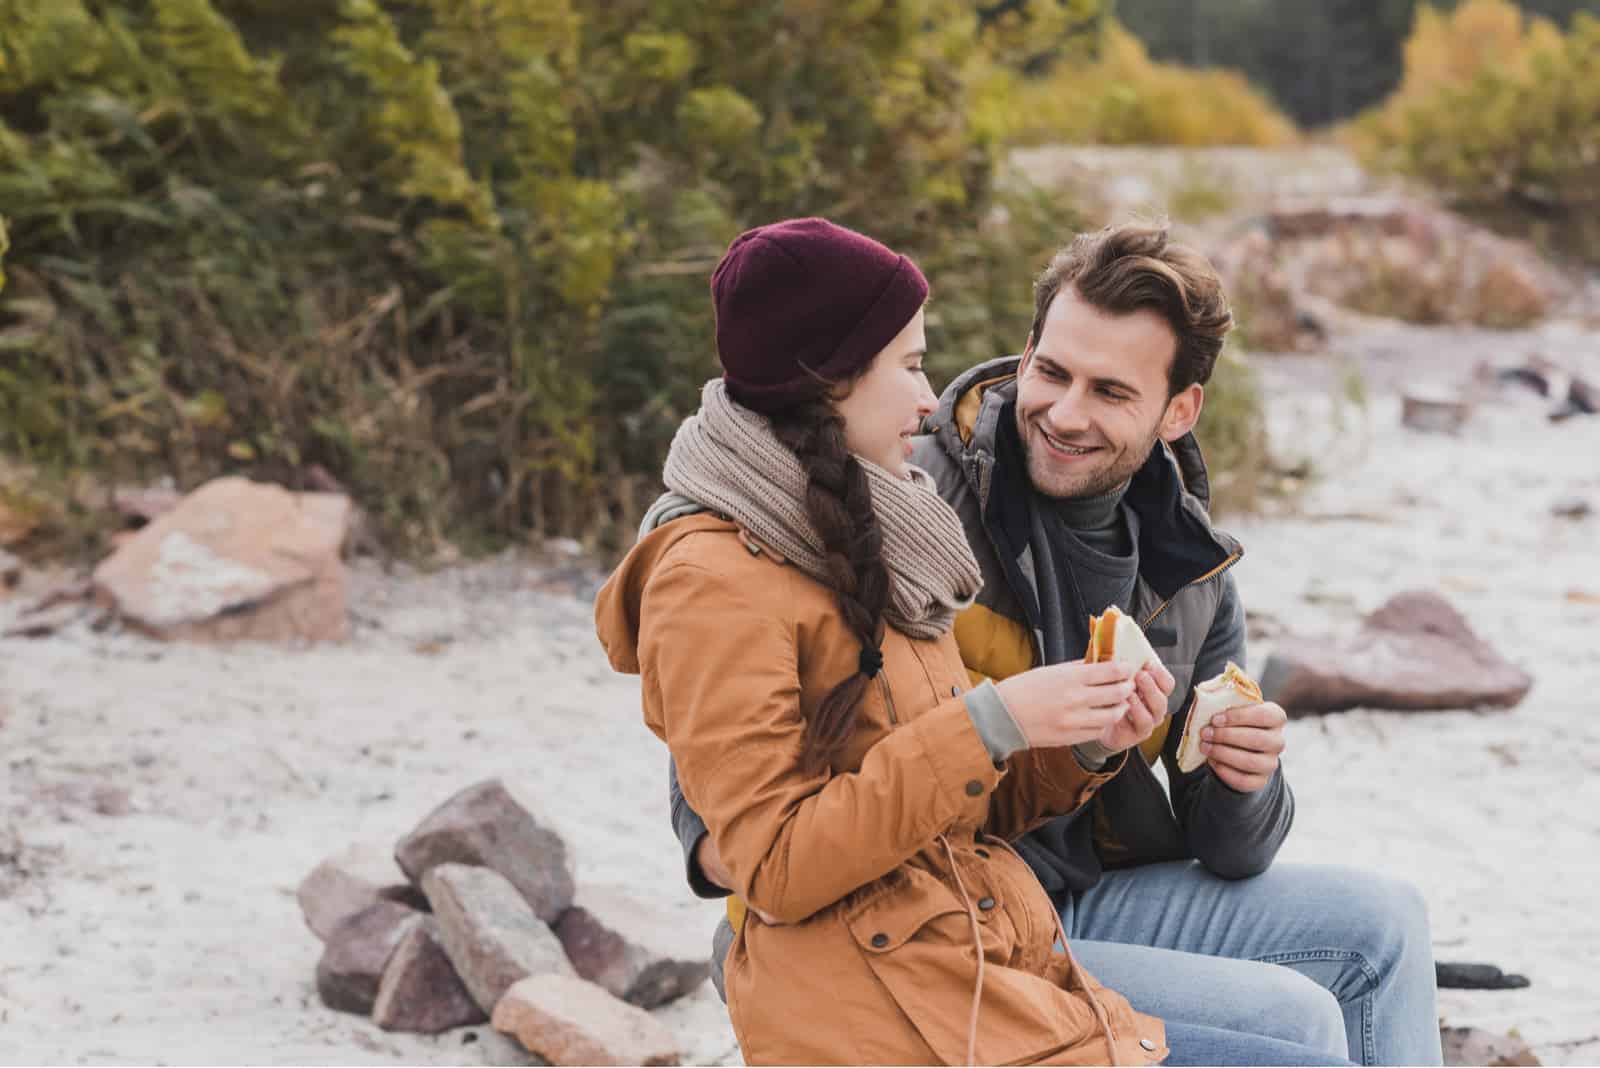 a smiling man sits next to a woman while holding a sandwich in his hands